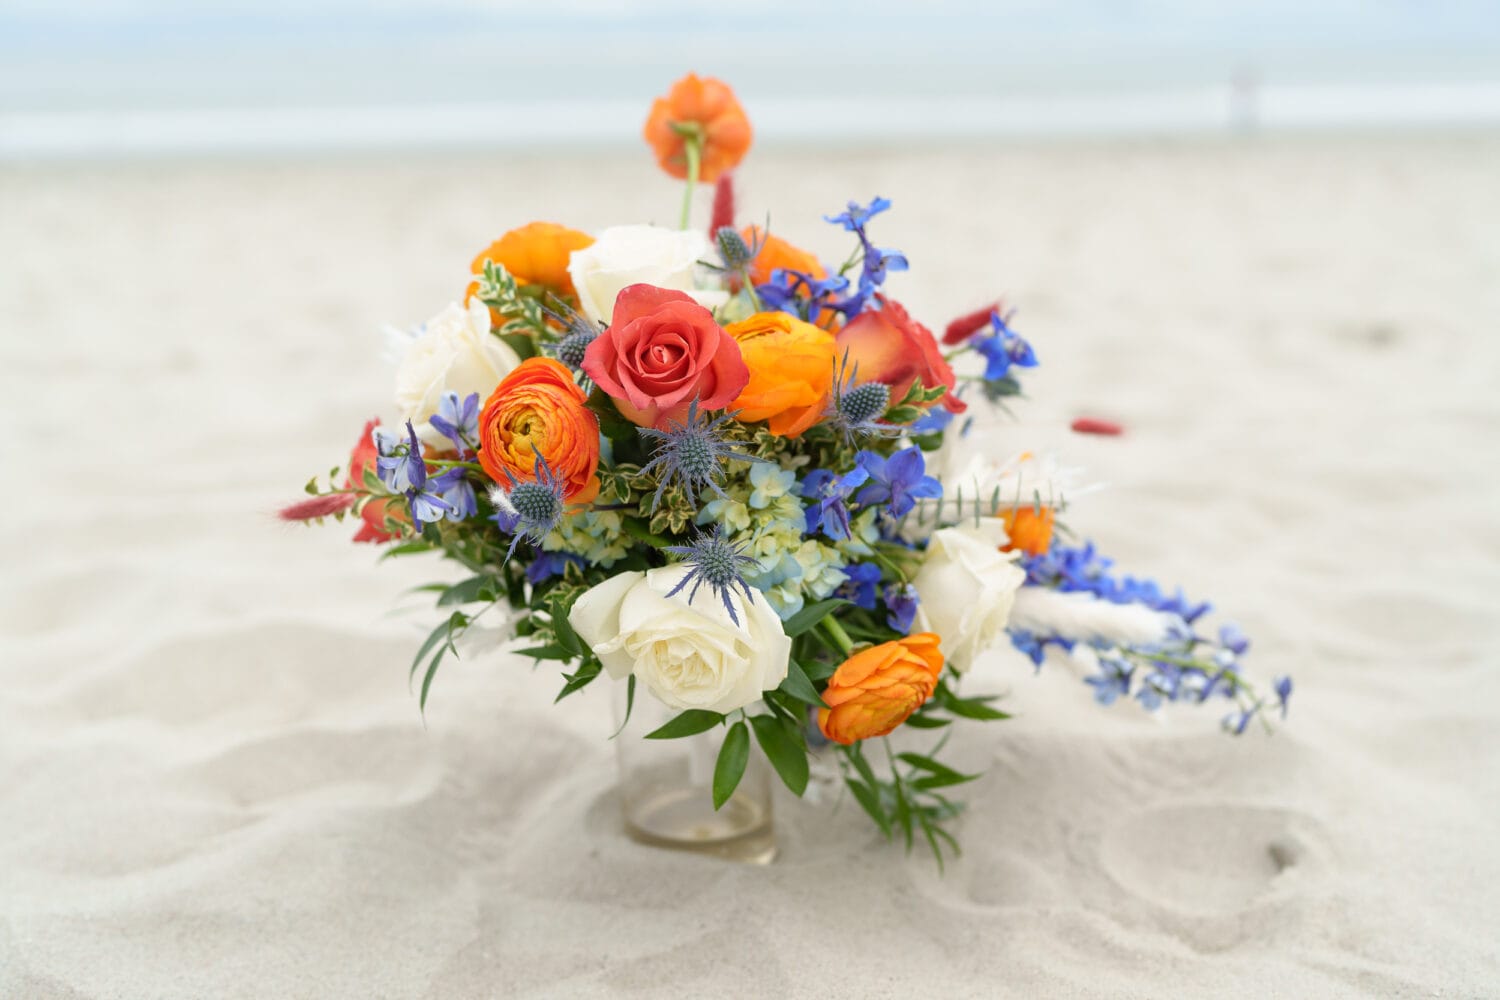 Bouquet sitting in the sand - 21 Main Events - North Myrtle Beach